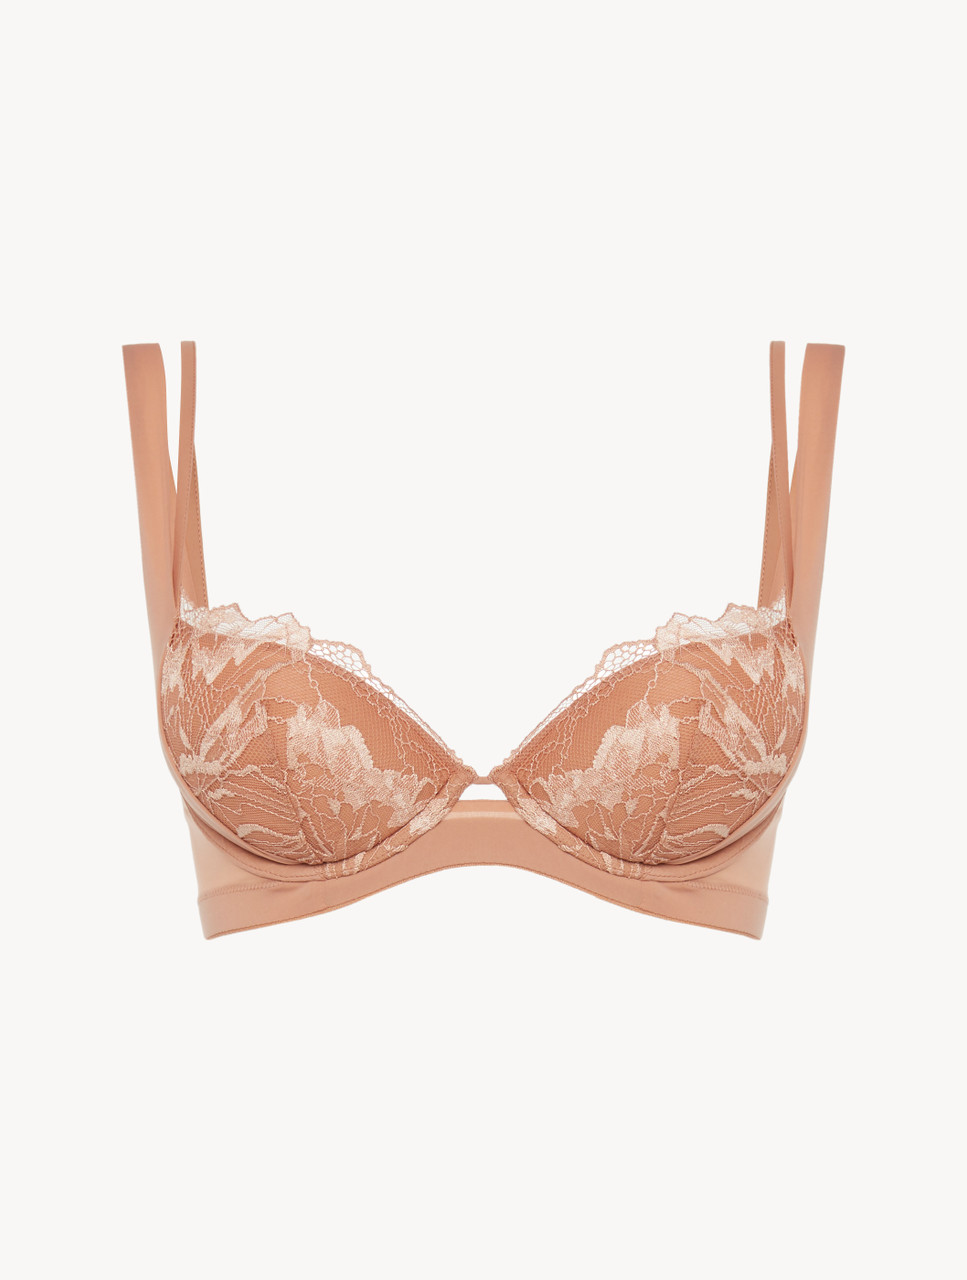 Push-up bra in pink with French Leavers lace - La Perla - Russia